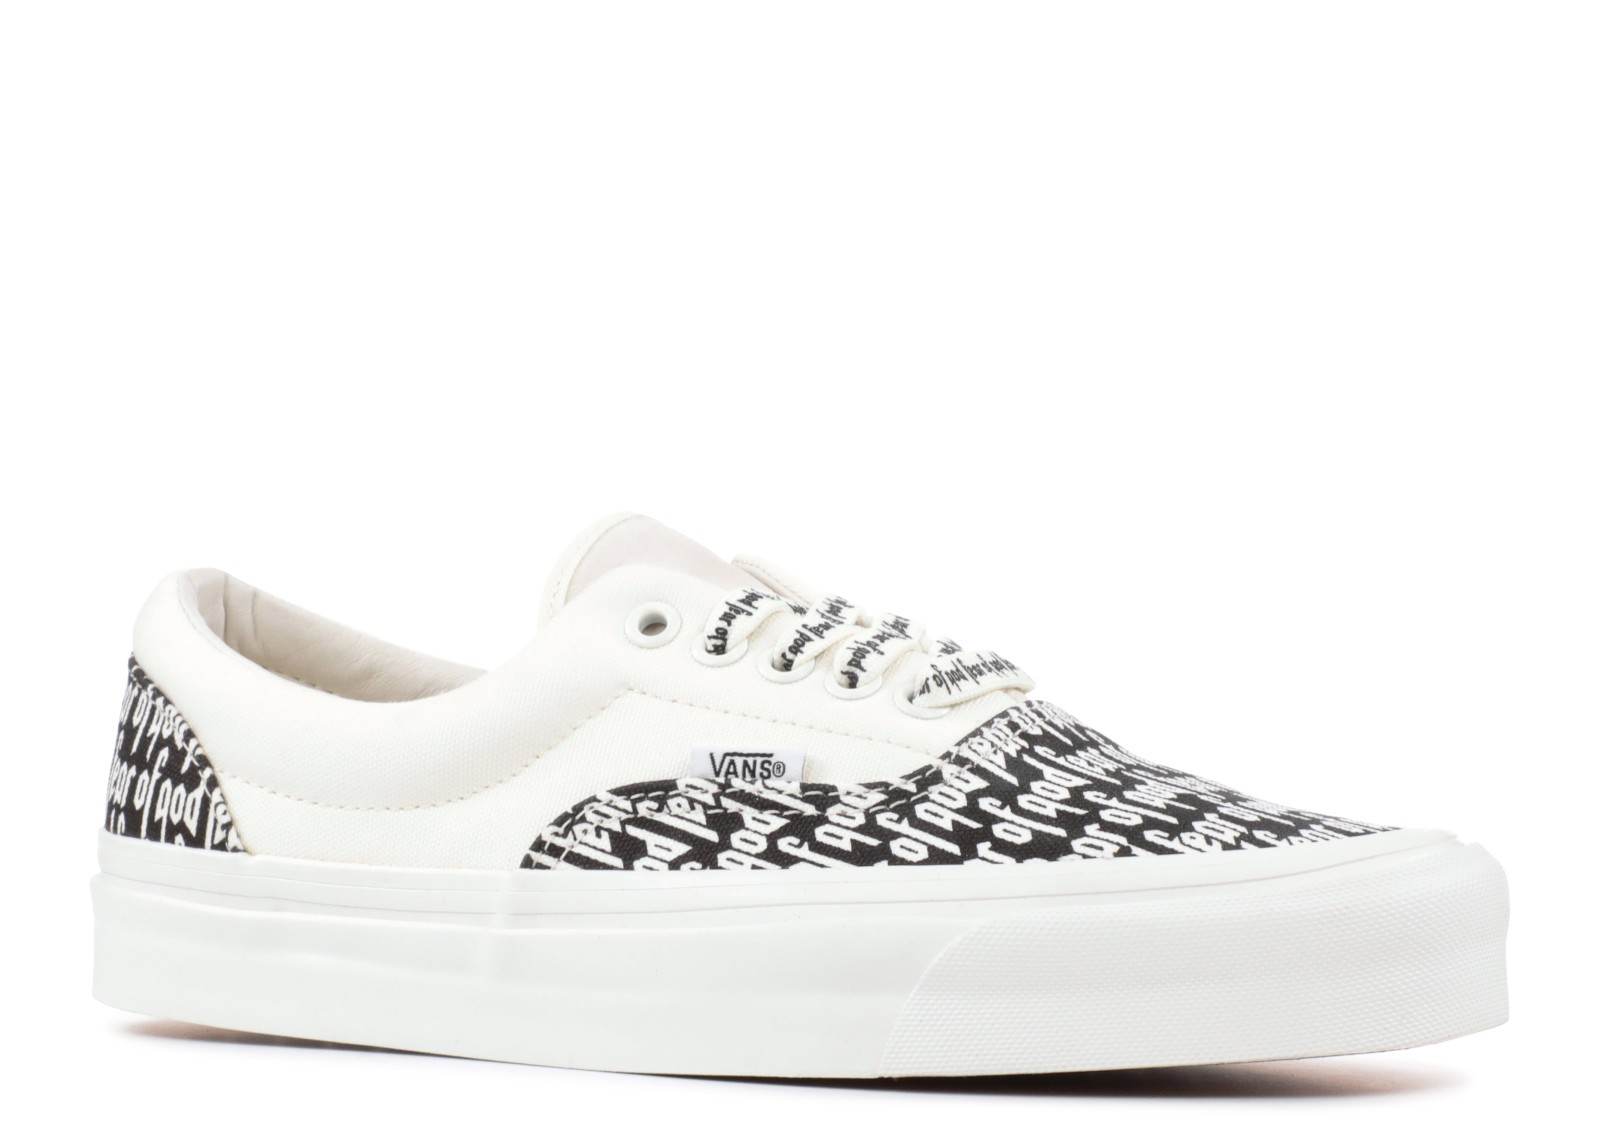 Vans Era 95 DX Fear of God Black And White Sneakers